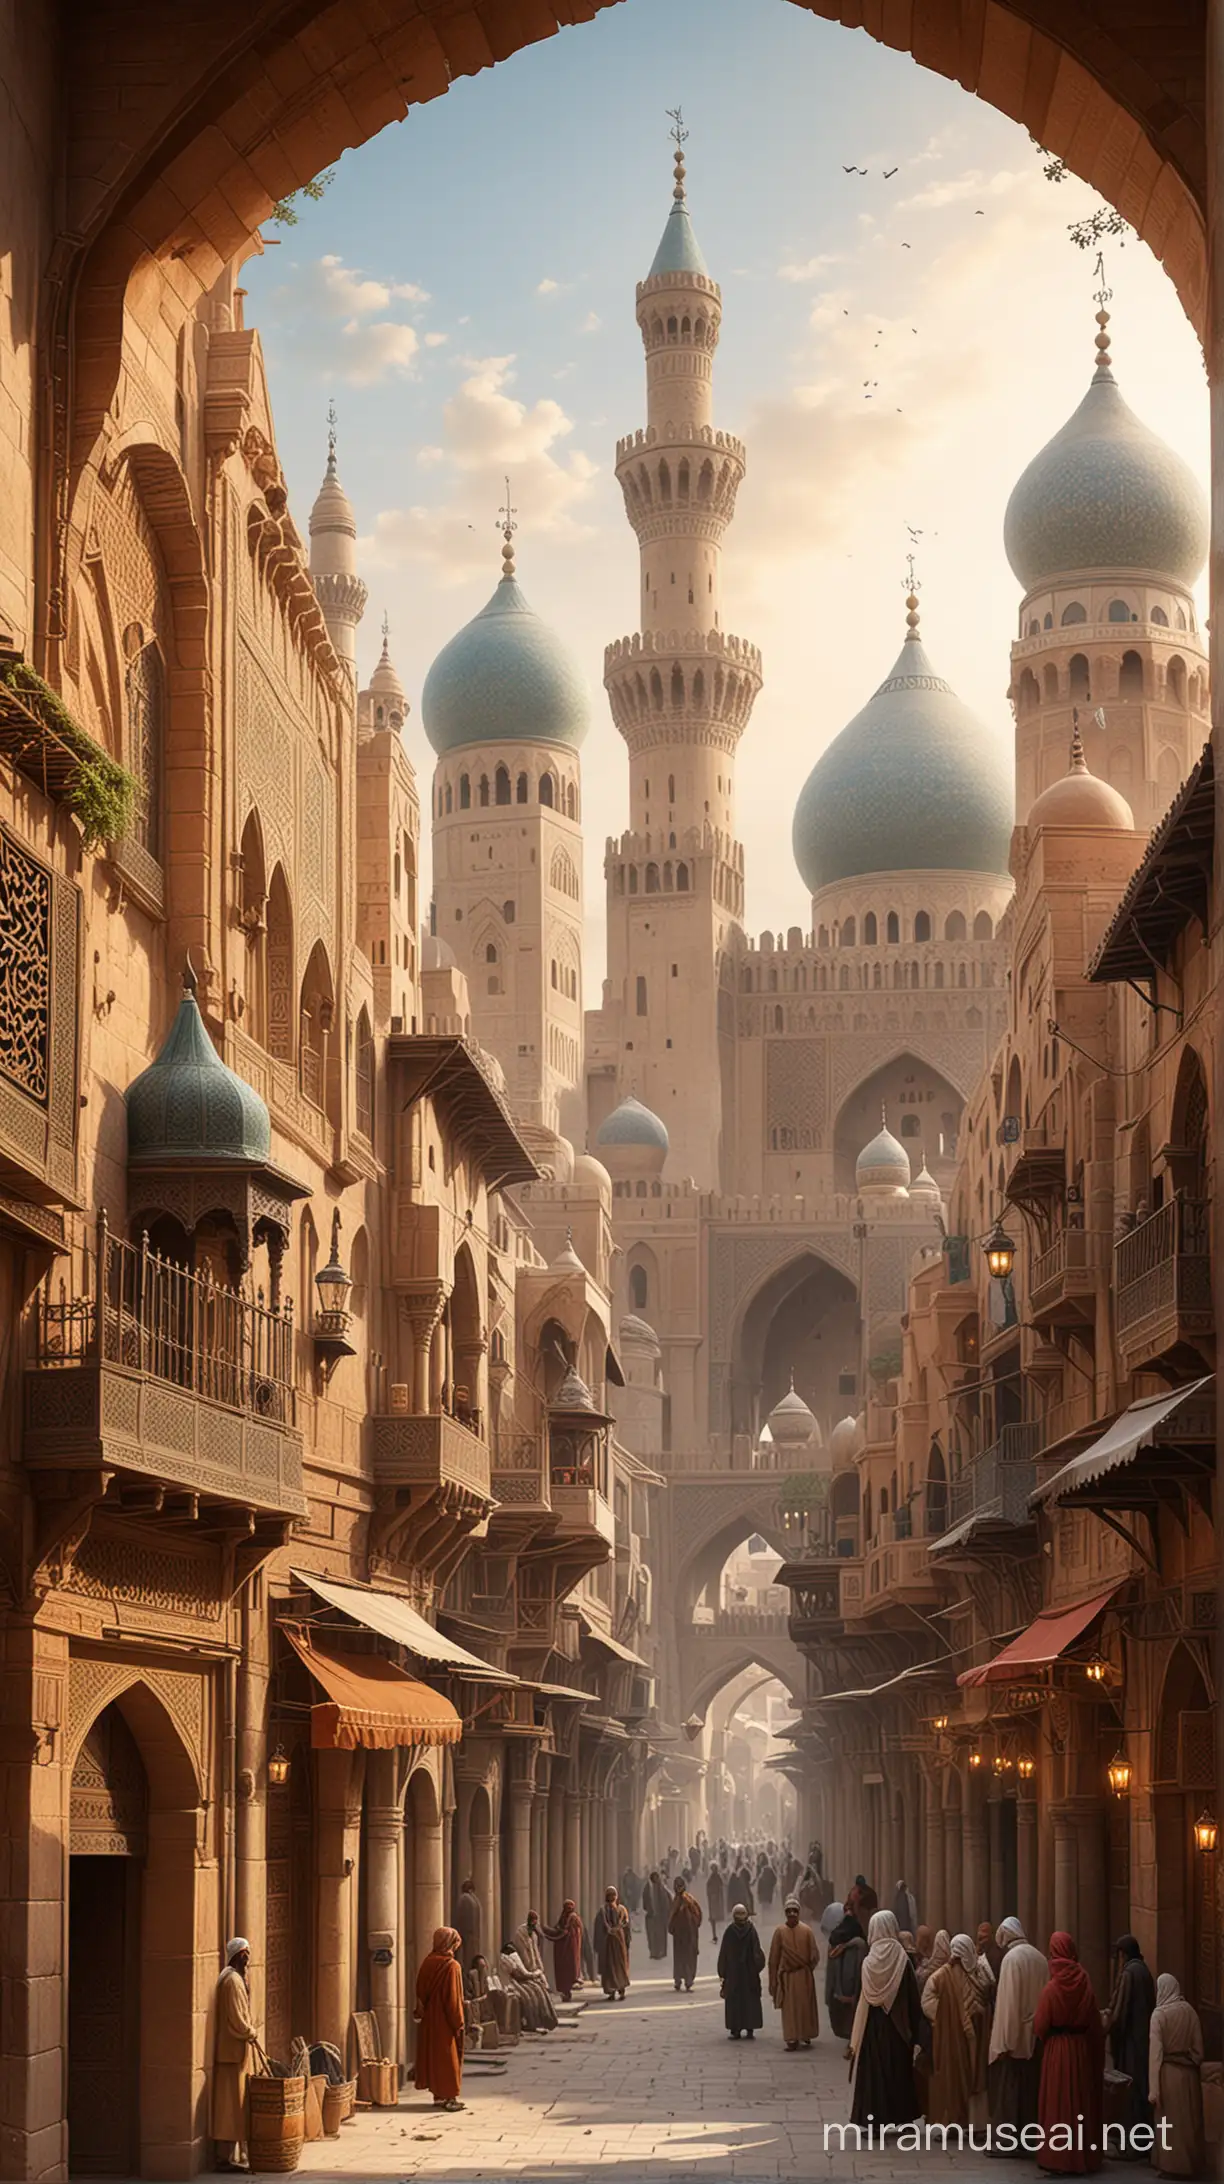 "Generate an illustration depicting an Islamic cityscape during the medieval period. Show towering minarets and domed mosques dominating the skyline, with intricate geometric patterns adorning their facades. Surround the city with fortified walls, punctuated by ornate gates adorned with Arabic calligraphy. Within the city, depict bustling markets filled with merchants selling spices, textiles, and exotic goods from distant lands. Show scholars engaged in deep discussions outside libraries and madrasas, while craftsmen ply their trades in workshops scattered throughout the streets. Ensure that the attire and architecture reflect the cultural and architectural motifs prevalent in medieval Islamic societies."